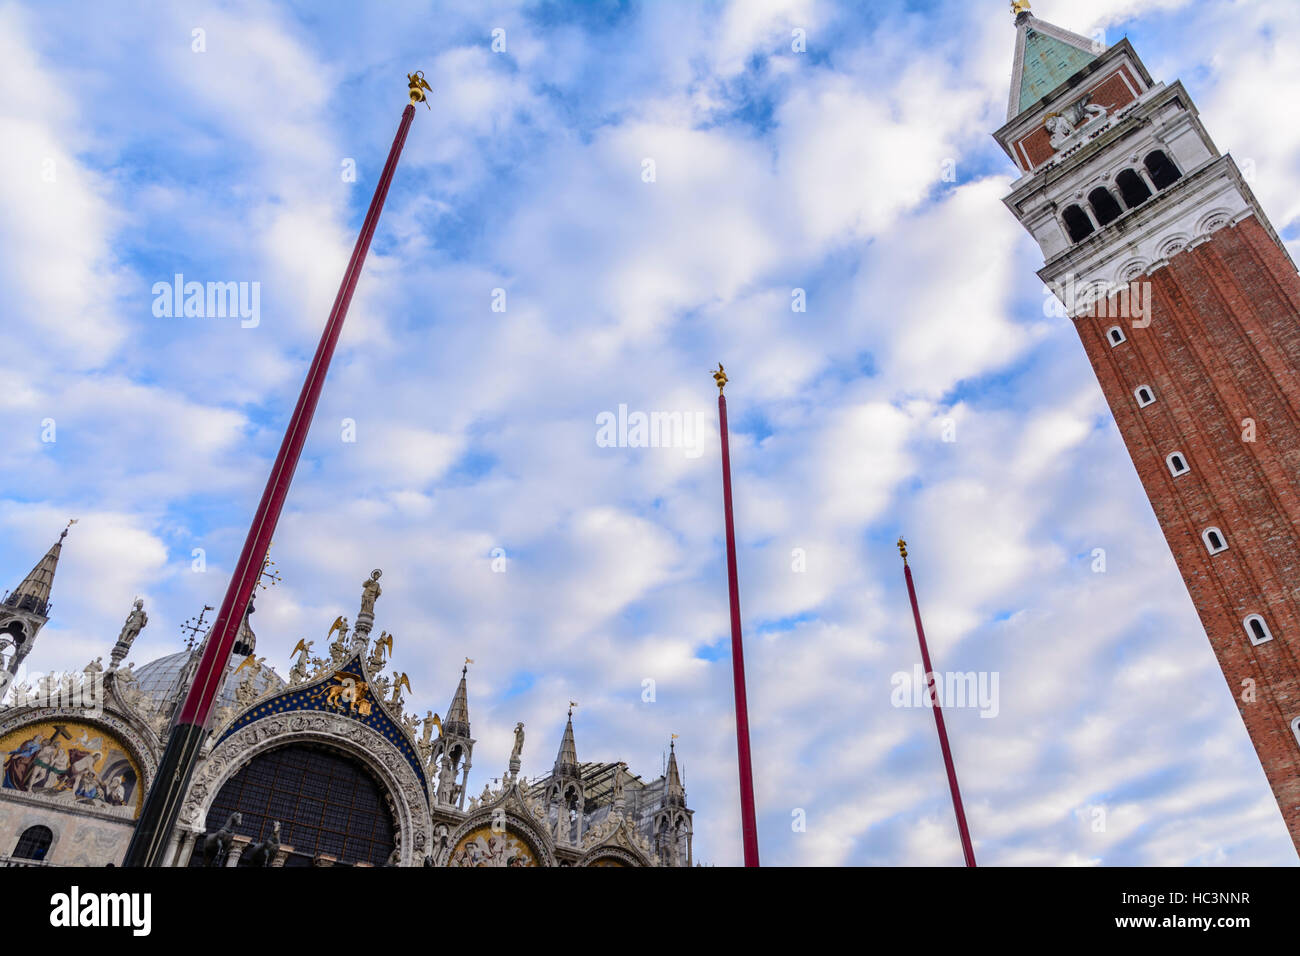 A low angle view of St. Mark's Basilica and the Campanile Tower in Venice, Italy Stock Photo